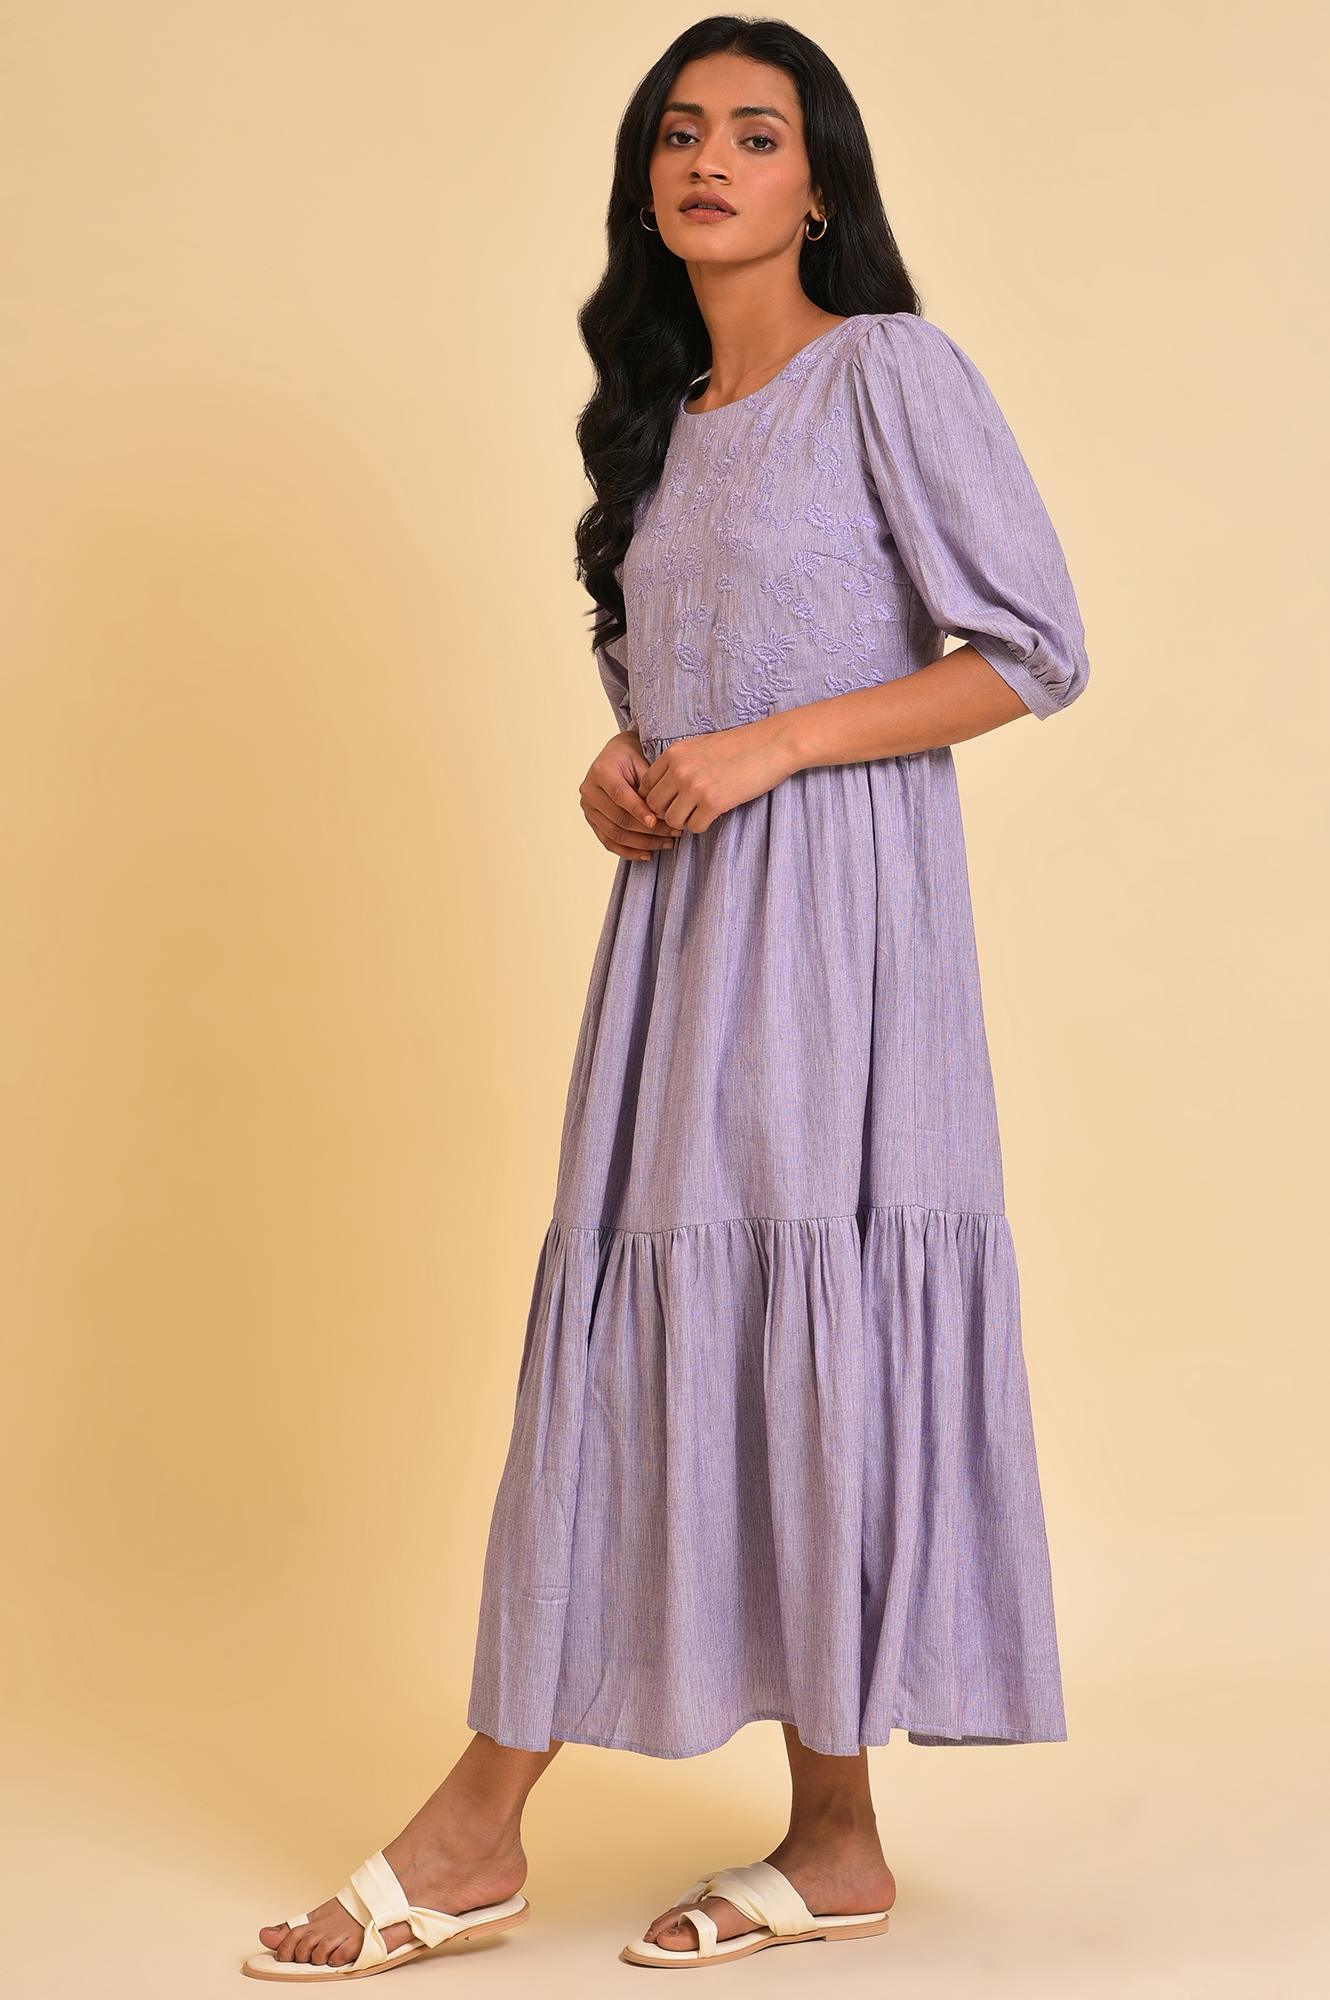 Light Purple Embroidered Tiered Chambray Dress - wforwoman